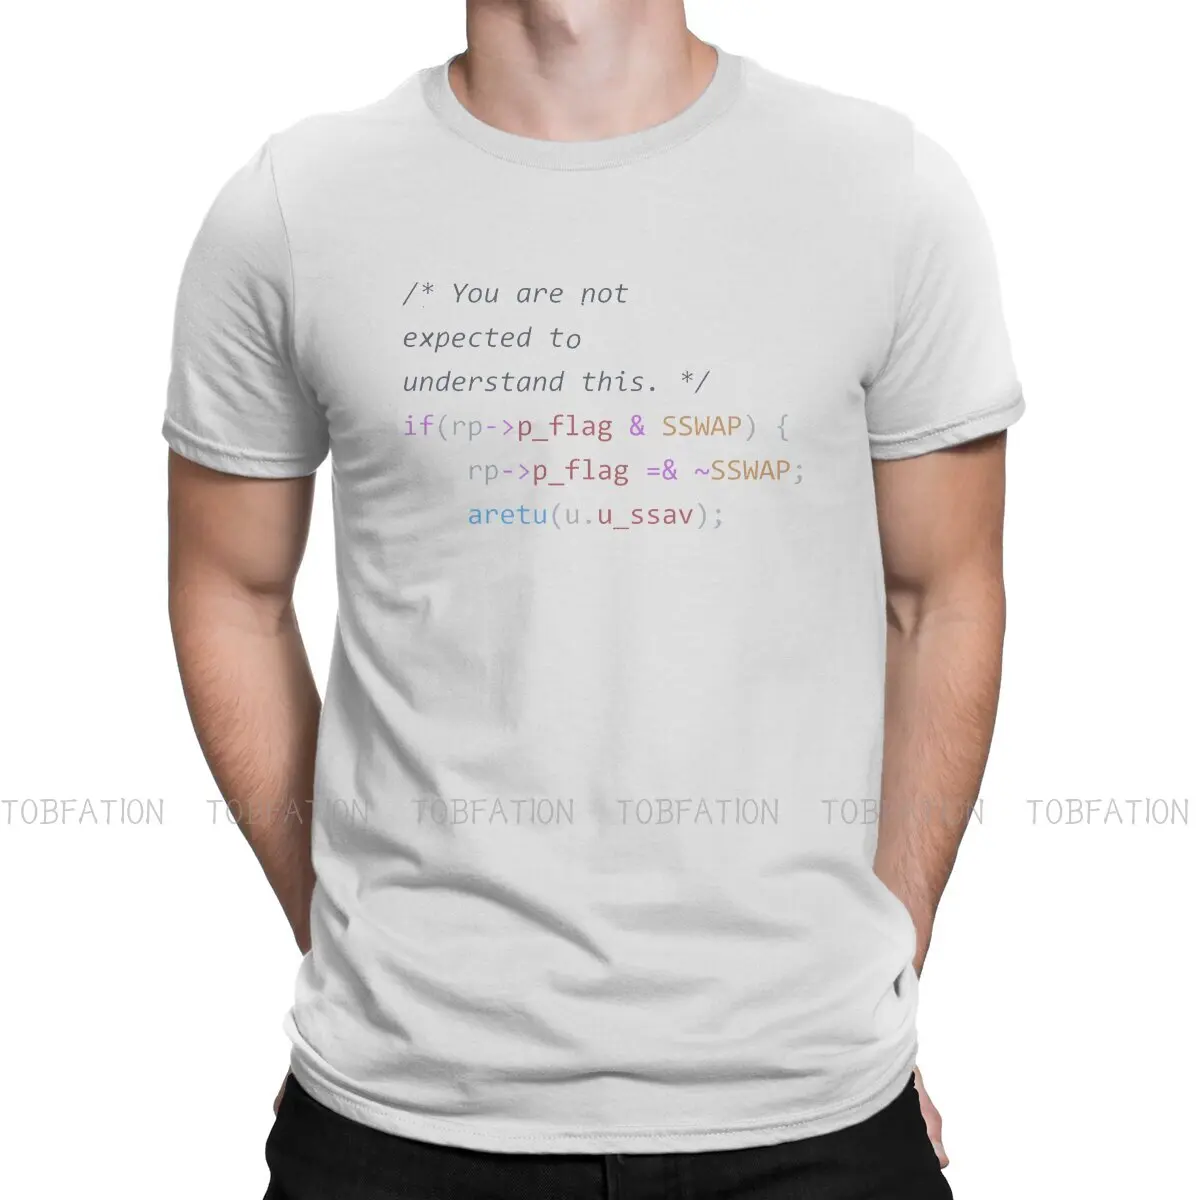 

Linux GNU Minix Unix 100% Cotton TShirts You Are Not Expected to UnderstandThis Code in C Programming Language Homme T Shirt 6XL